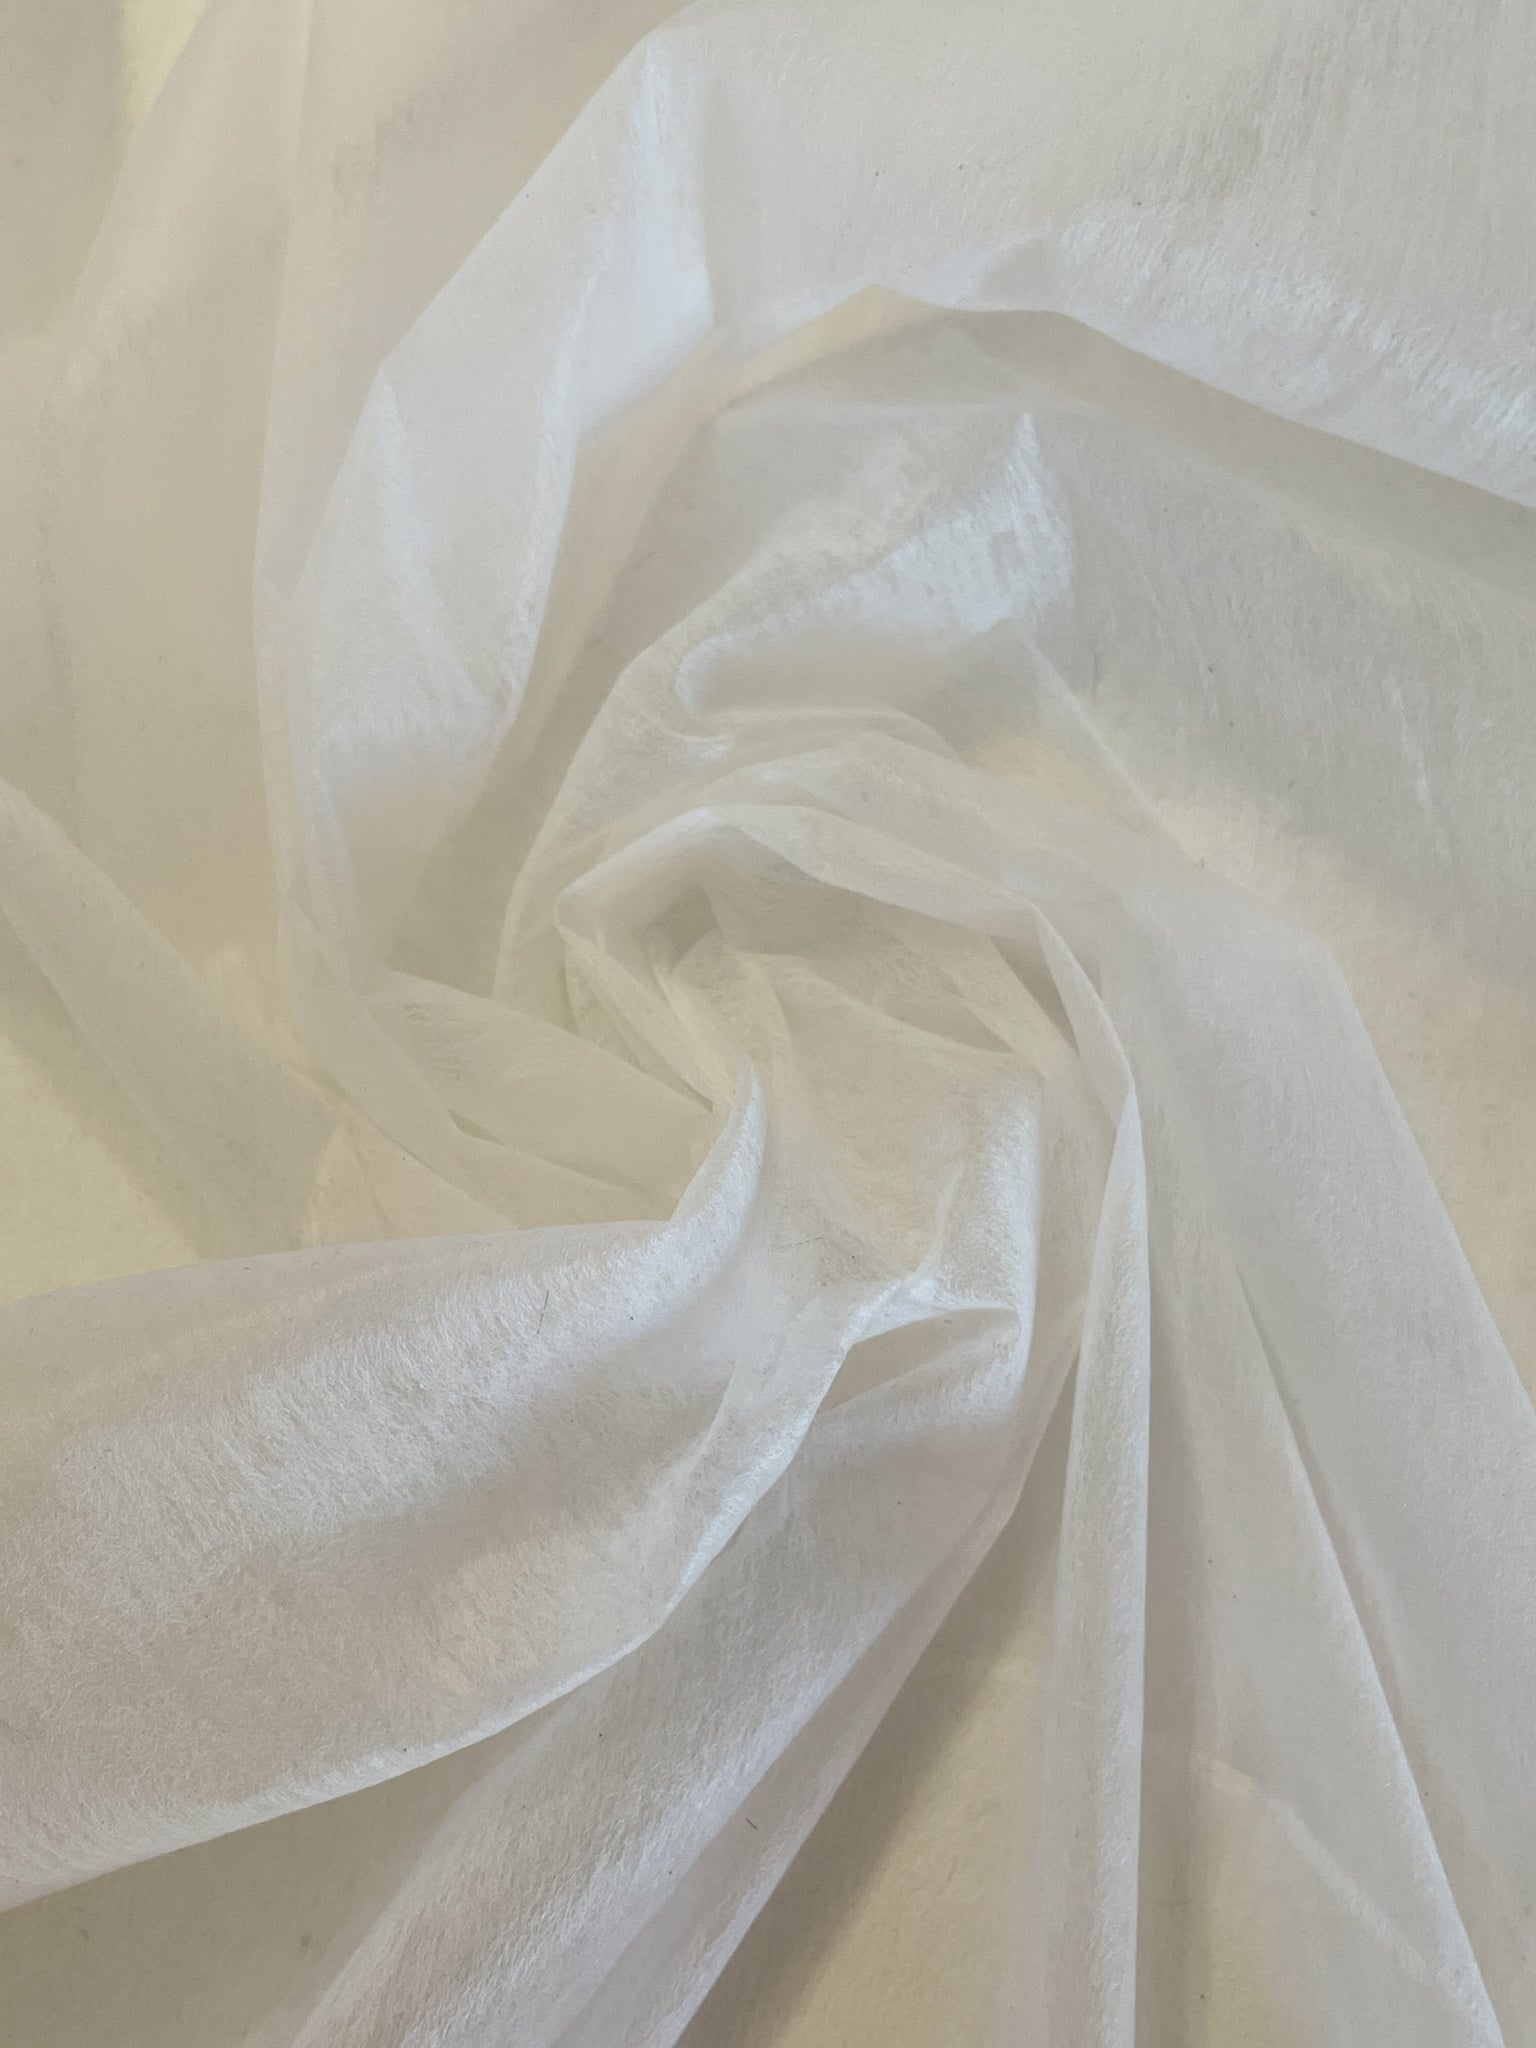 SALE Polyester Non-Woven Lightweight Sew-In Interfacing - White